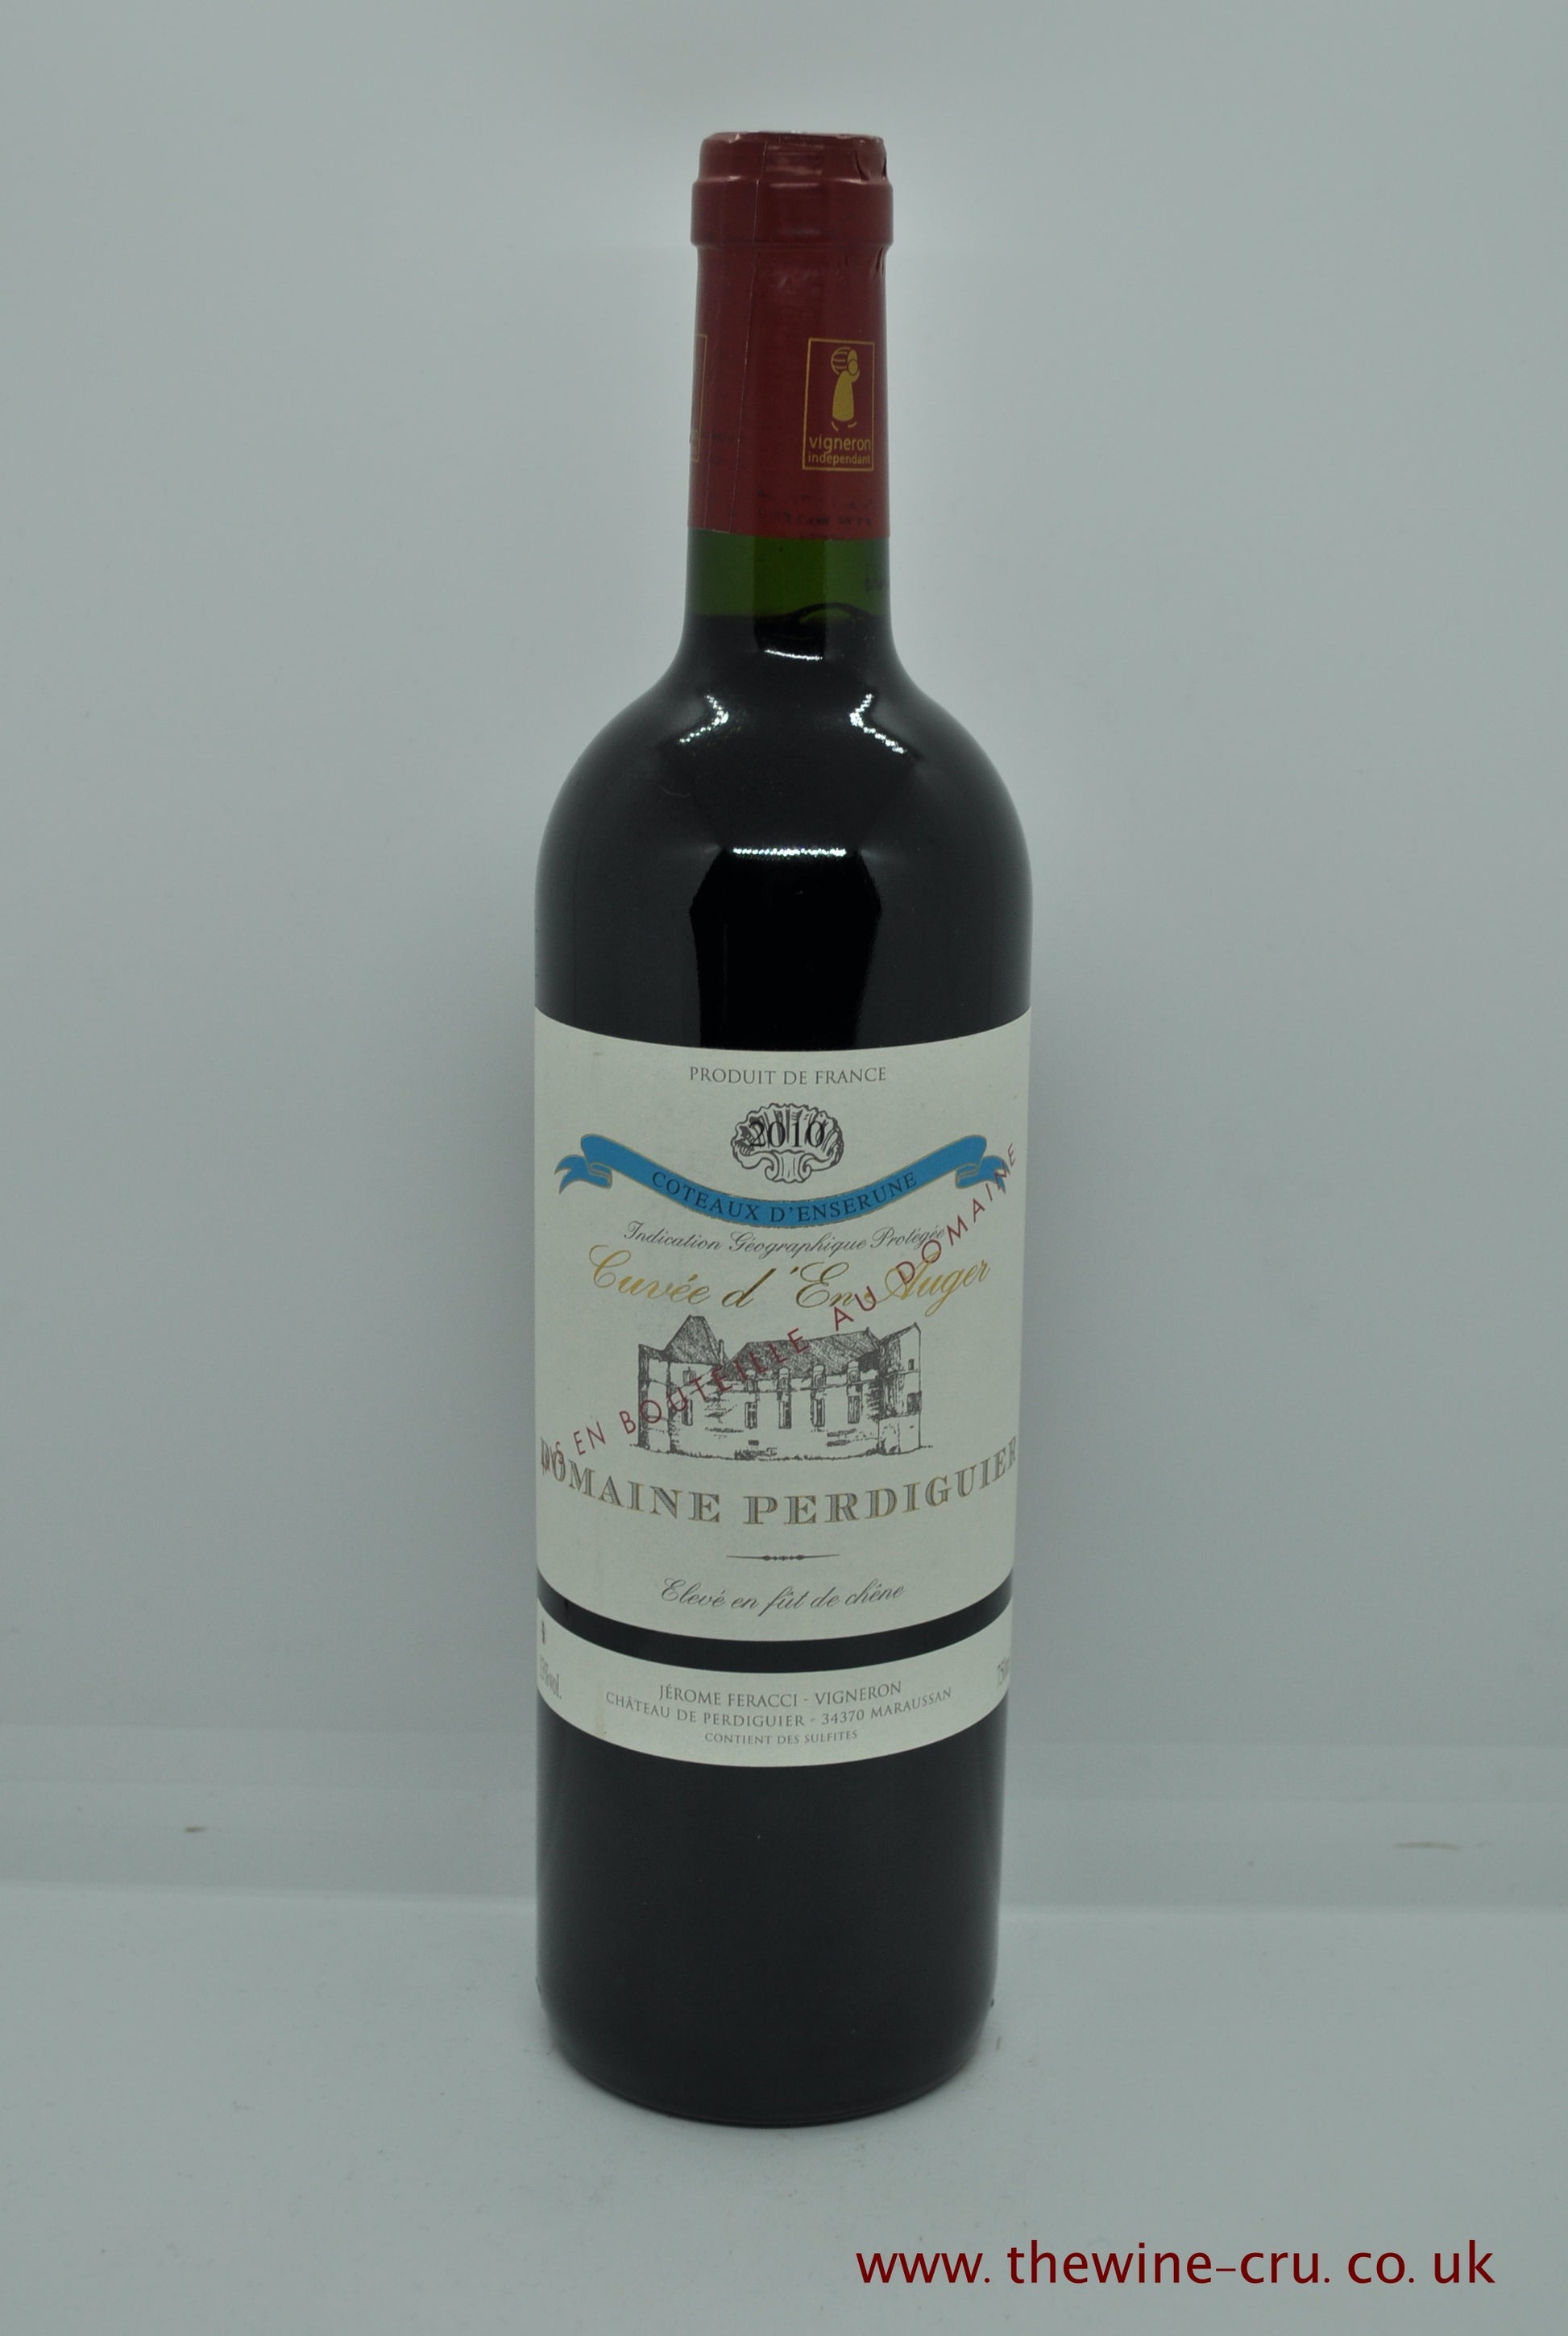 A bottle of 2010 vintage red wine. Domaine Perdiguier Cuvee d'En Auger 2010. France Languedoc-Roussillon. The bottle is in excellent condition. Immediate delivery. Free local delivery. Gift wrapping available.